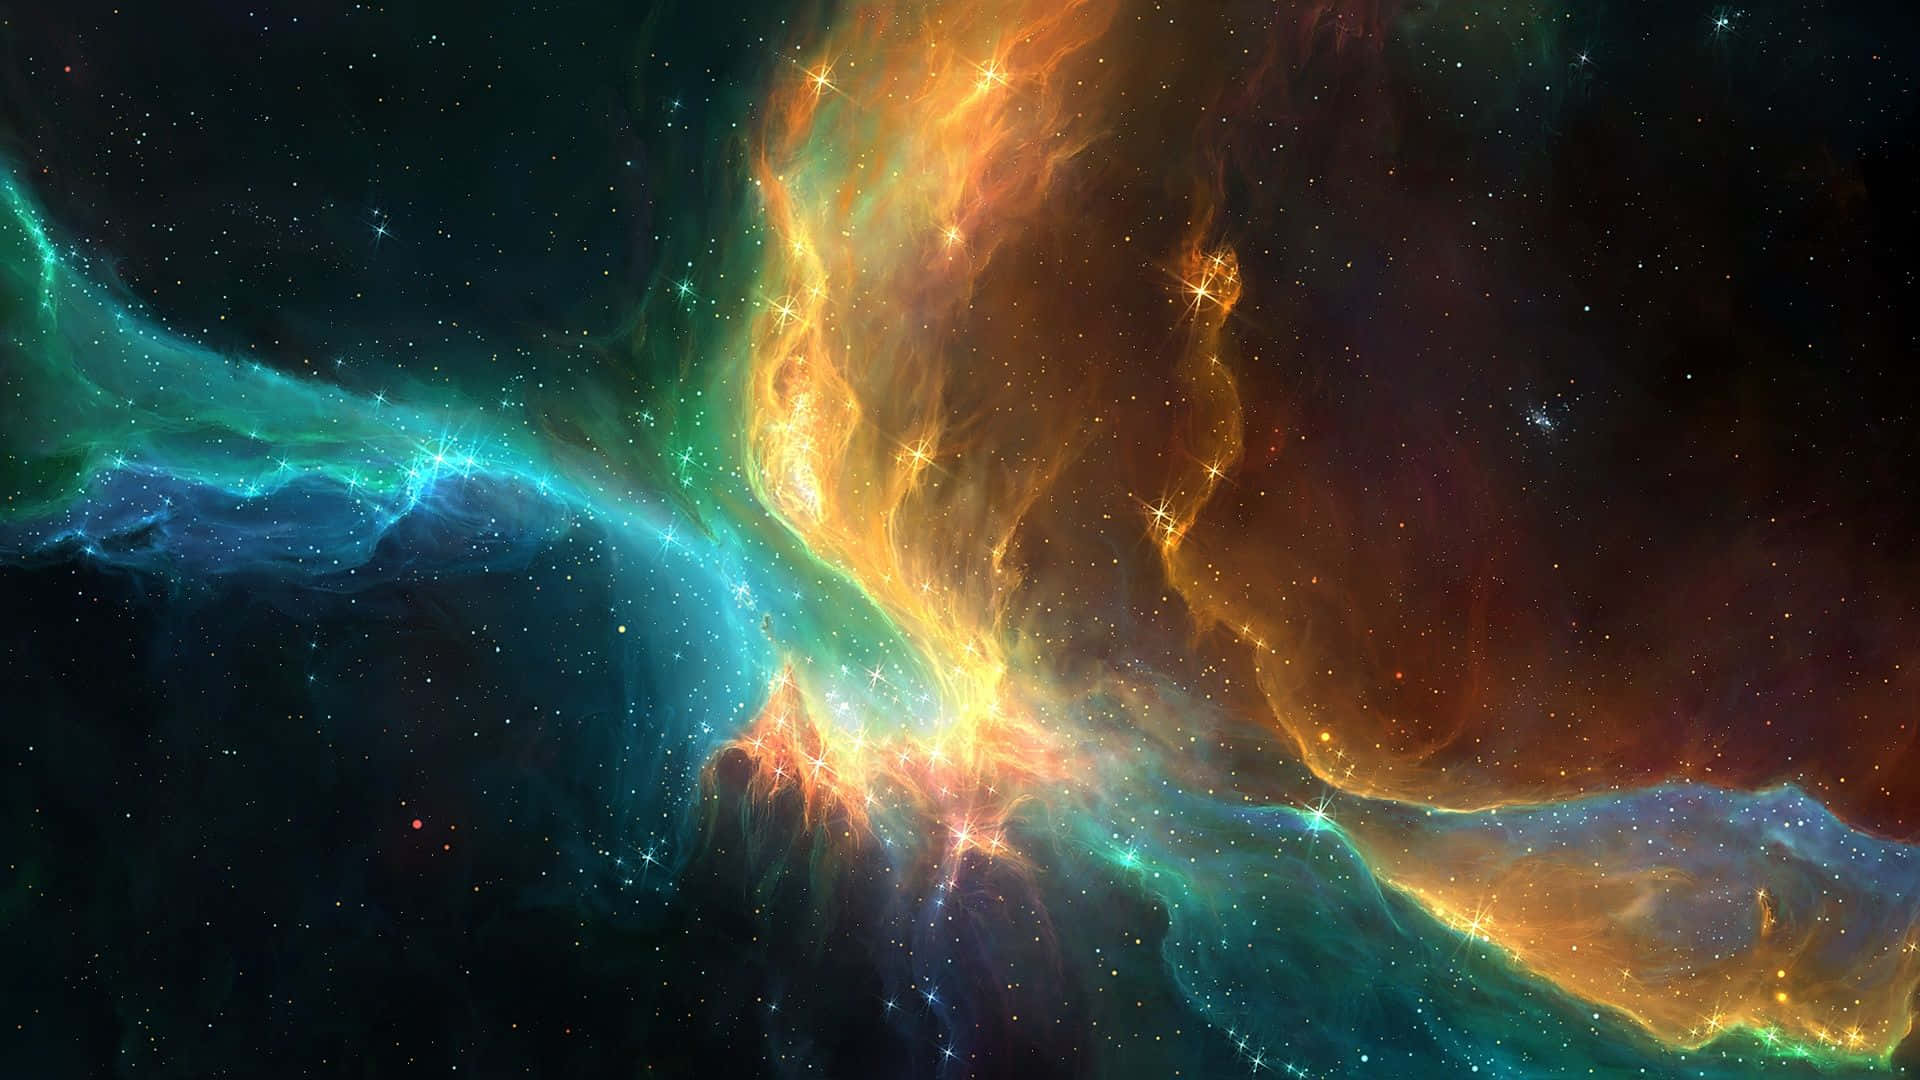 Explore the wonders of the Space Nebula, a breathtaking cosmic cloud of interstellar gas, dust, and stars. Wallpaper